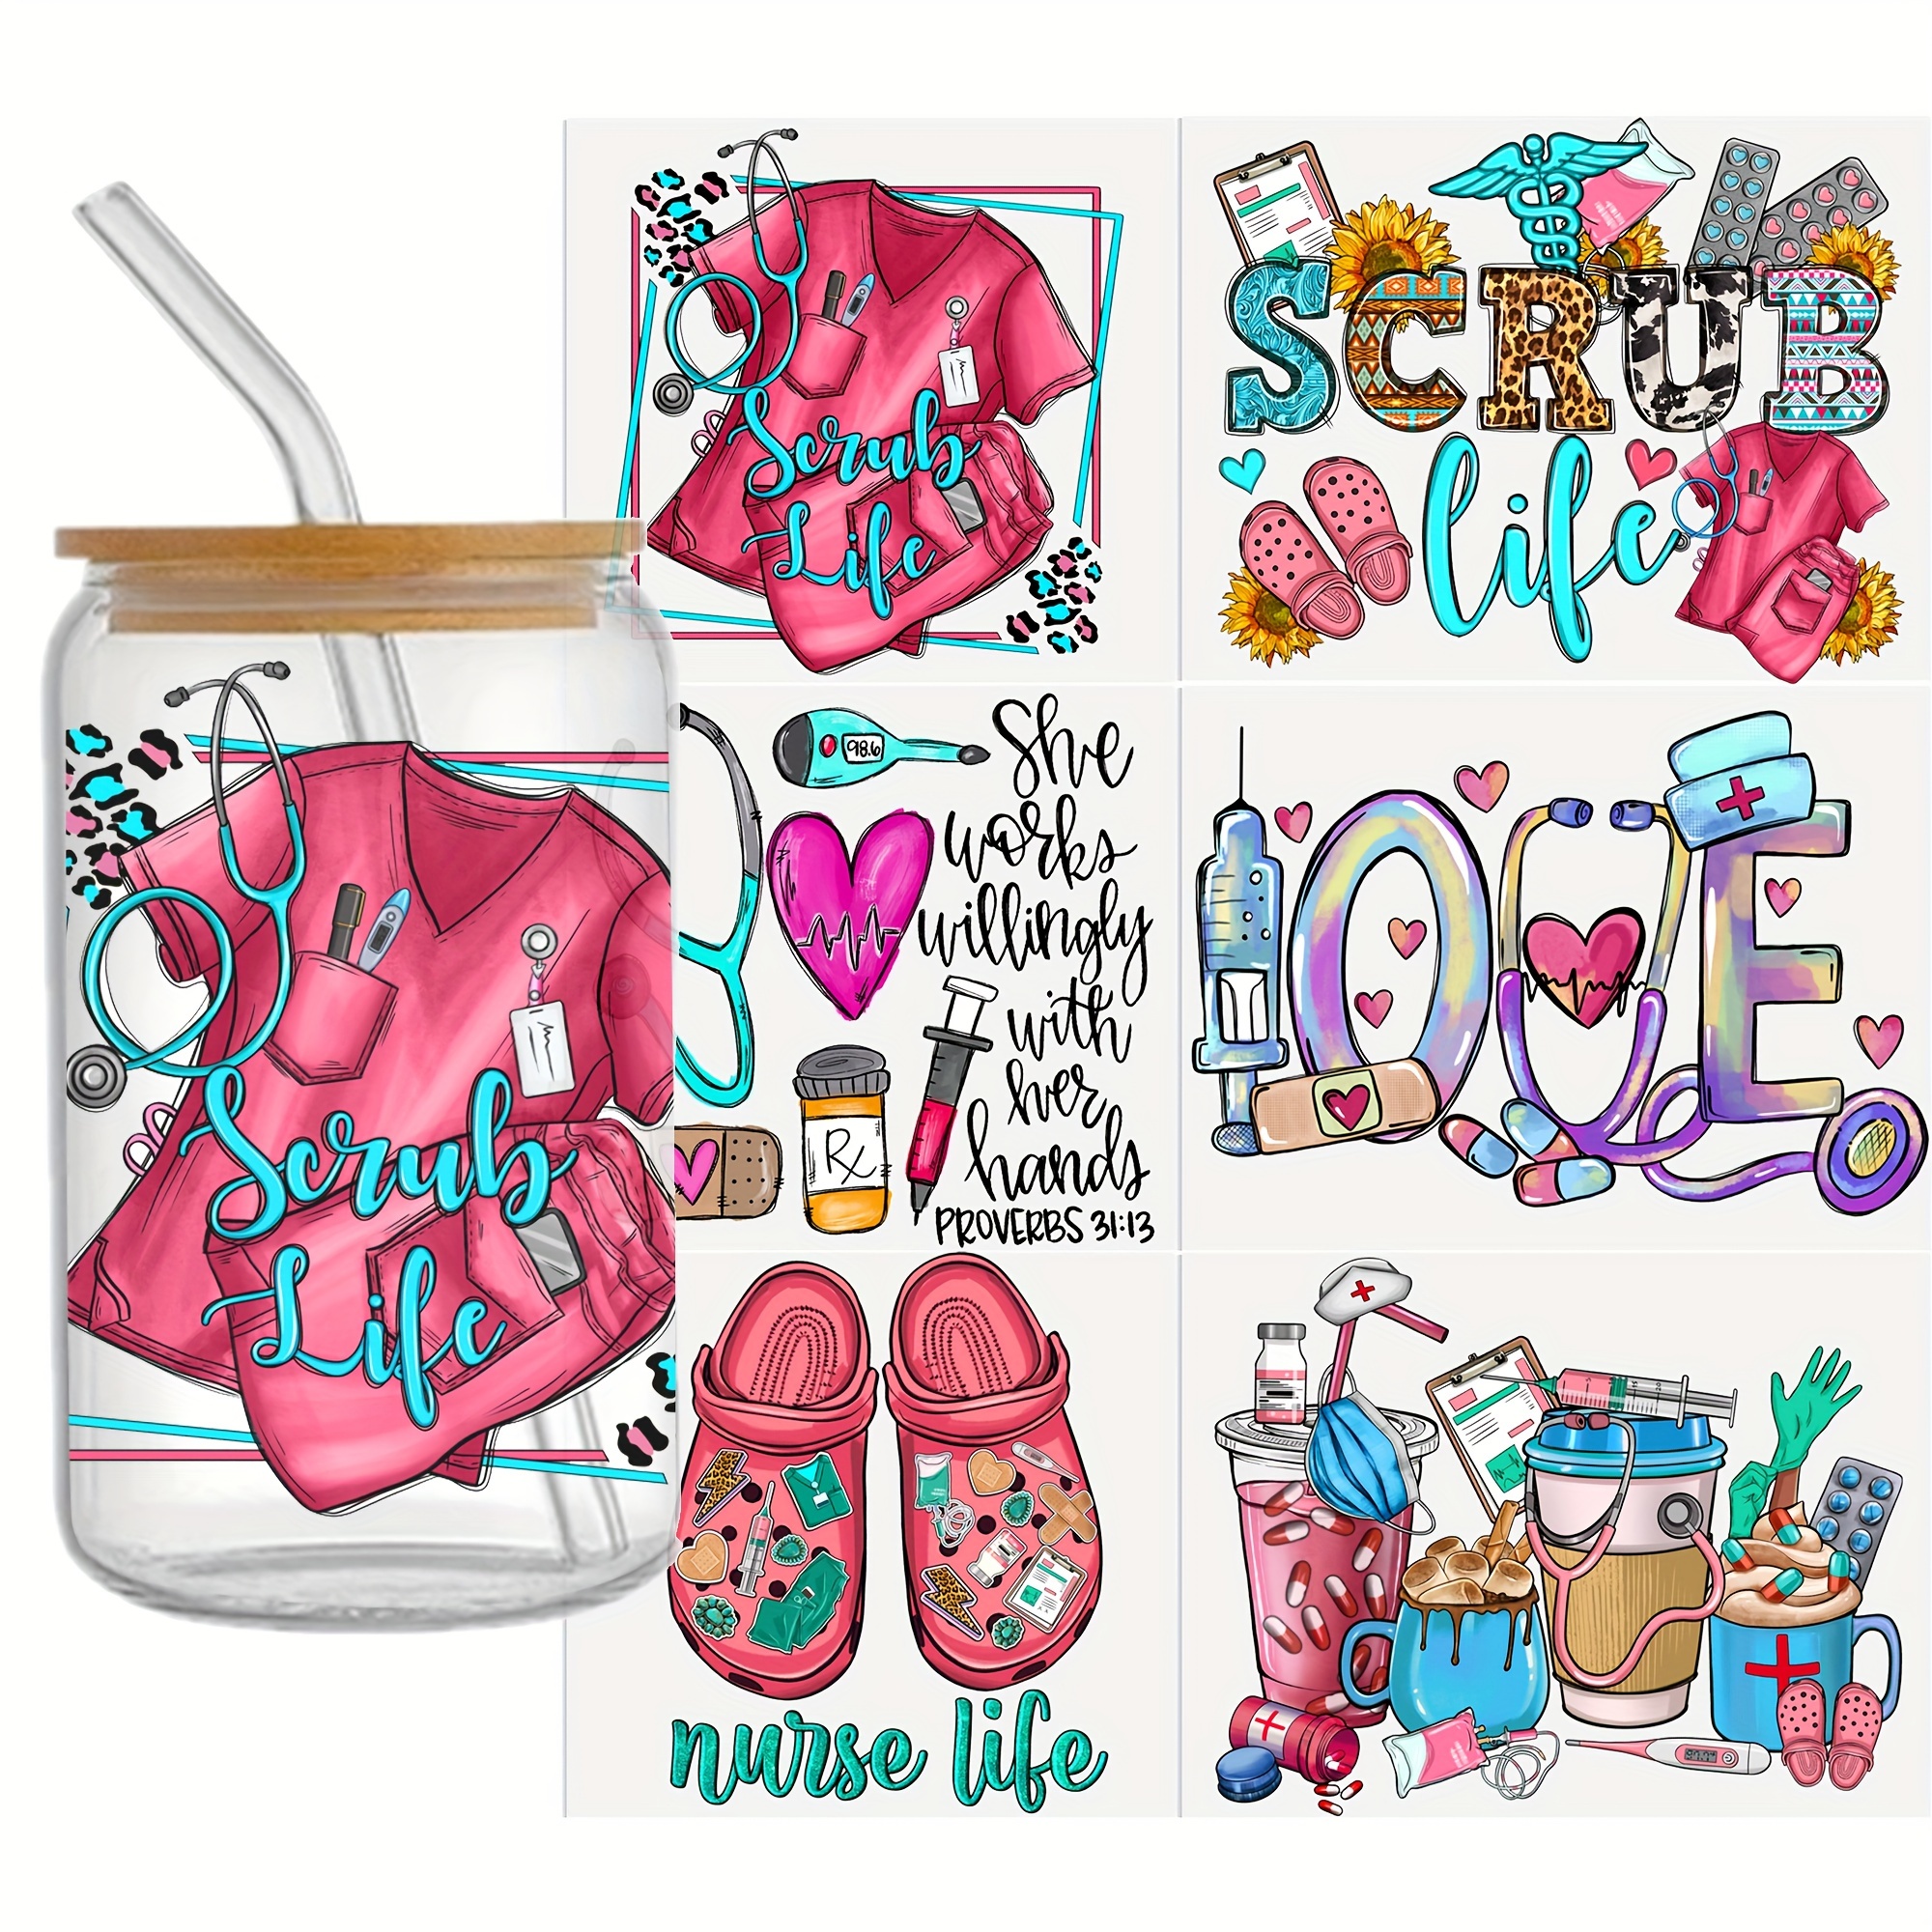 Uv Dtf Cup Wrap Transfer Stickers For Glass Cups Uv Dtf Cup - Temu